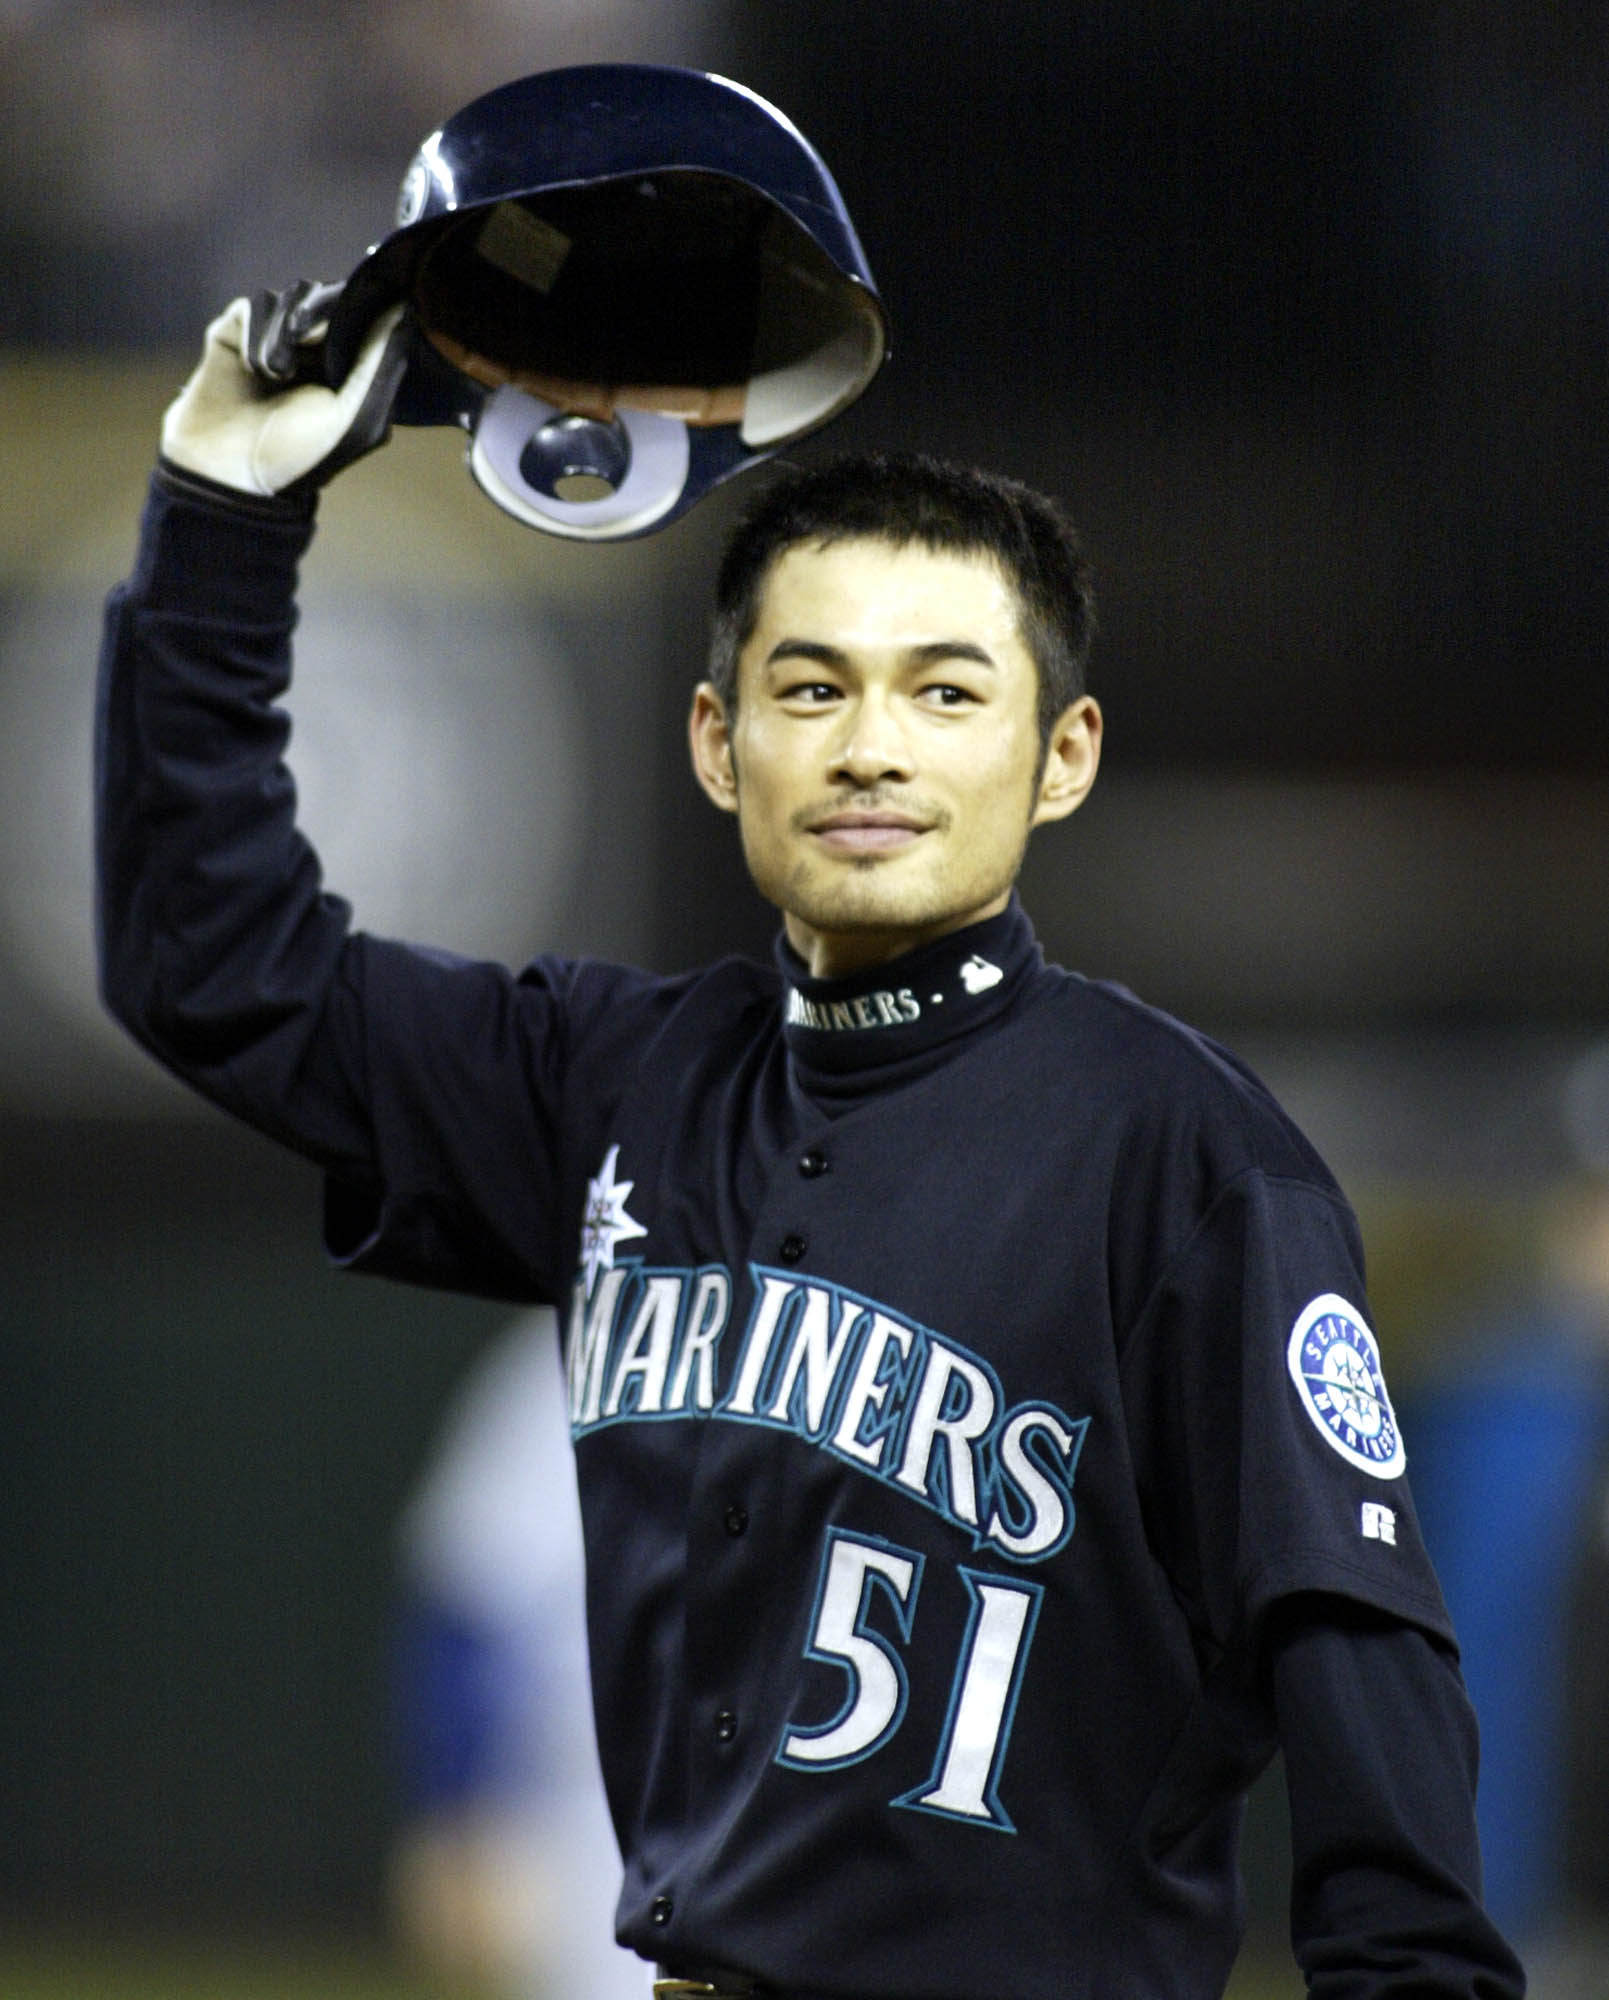 51 Days Until Opening Day: When Ichiro signed with the Seattle Mariners, he  chose to wear #51 which was previously worn by Randy Johnson. As a sign of  respect, Ichiro sent a